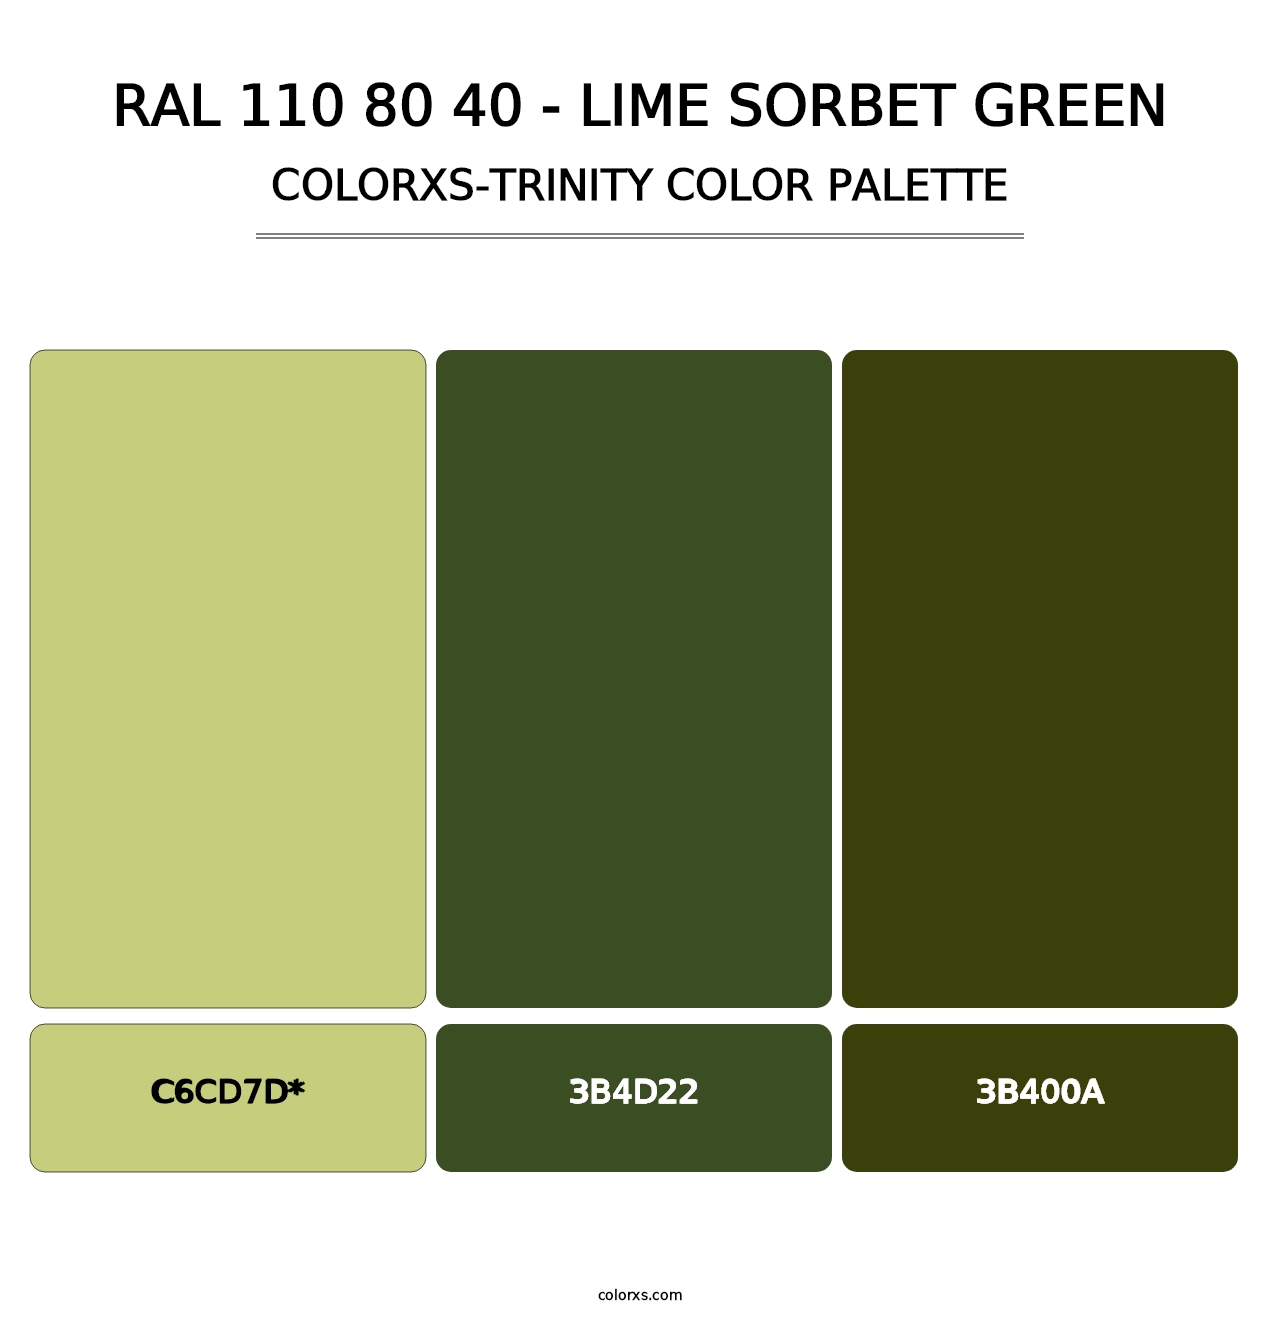 RAL 110 80 40 - Lime Sorbet Green - Colorxs Trinity Palette